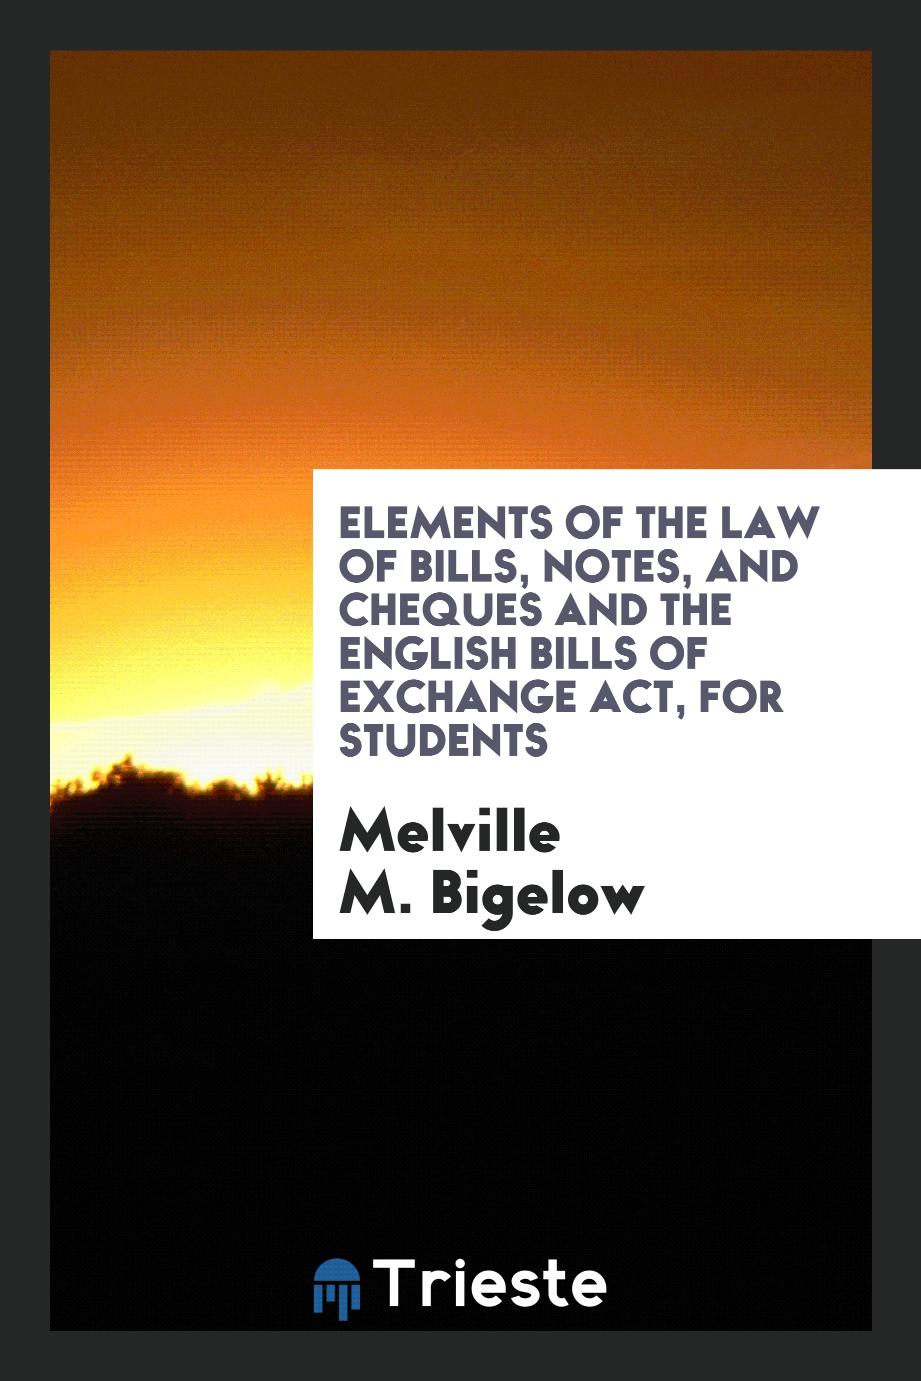 Elements of the Law of Bills, Notes, and Cheques and the English Bills of Exchange Act, for Students